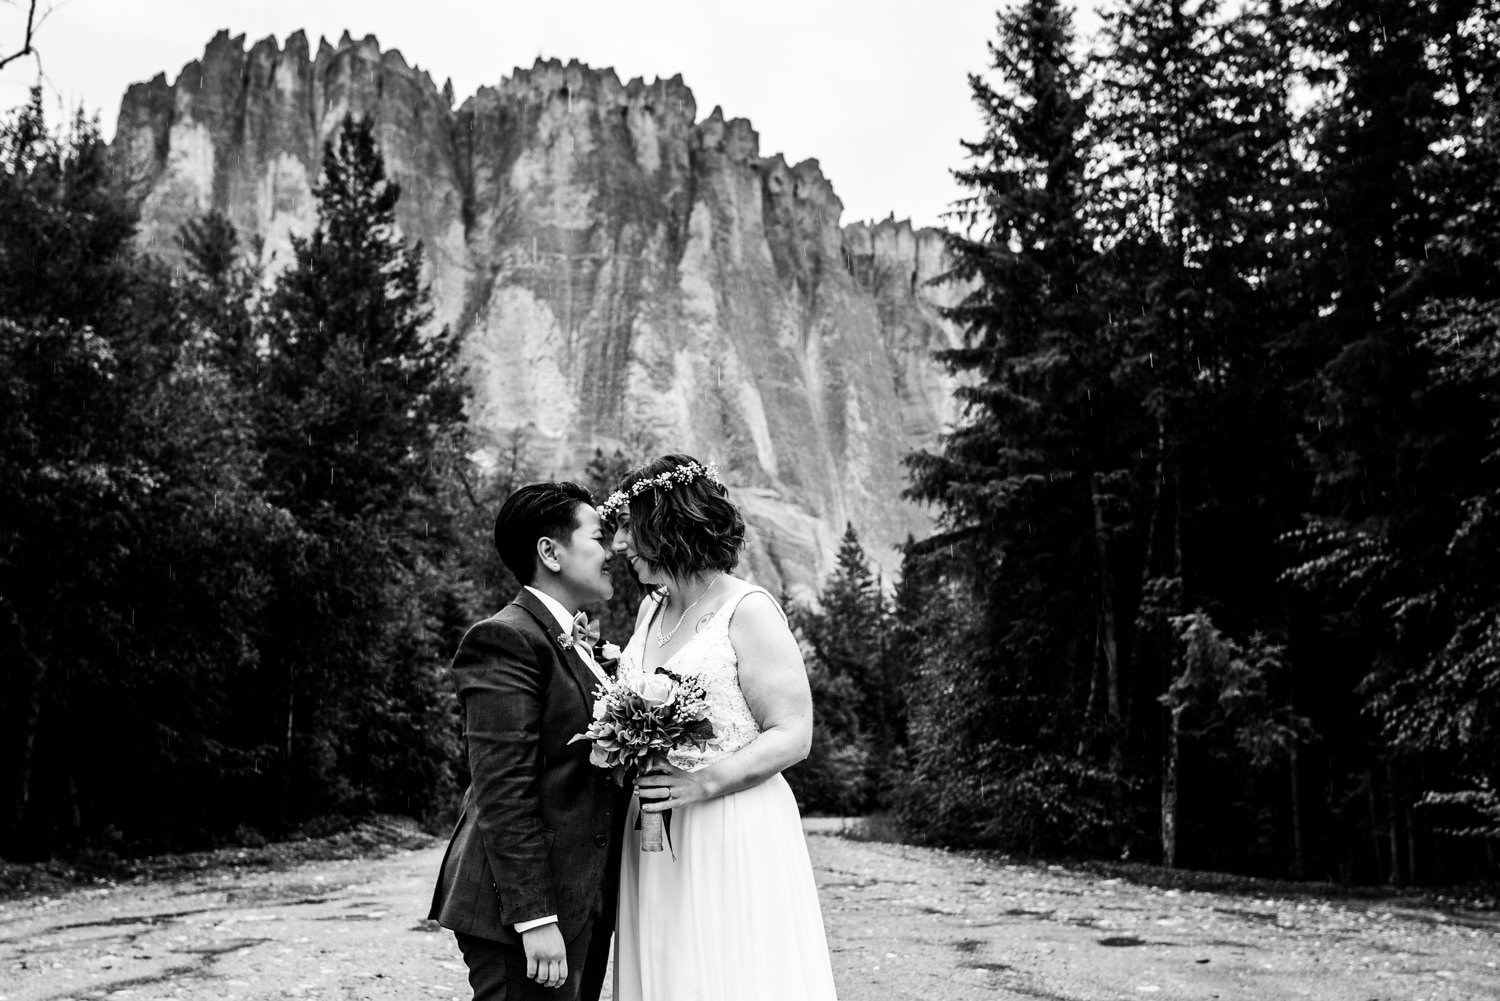 Wedding portraits in front of the Hoodoo's in fairmont hot springs.